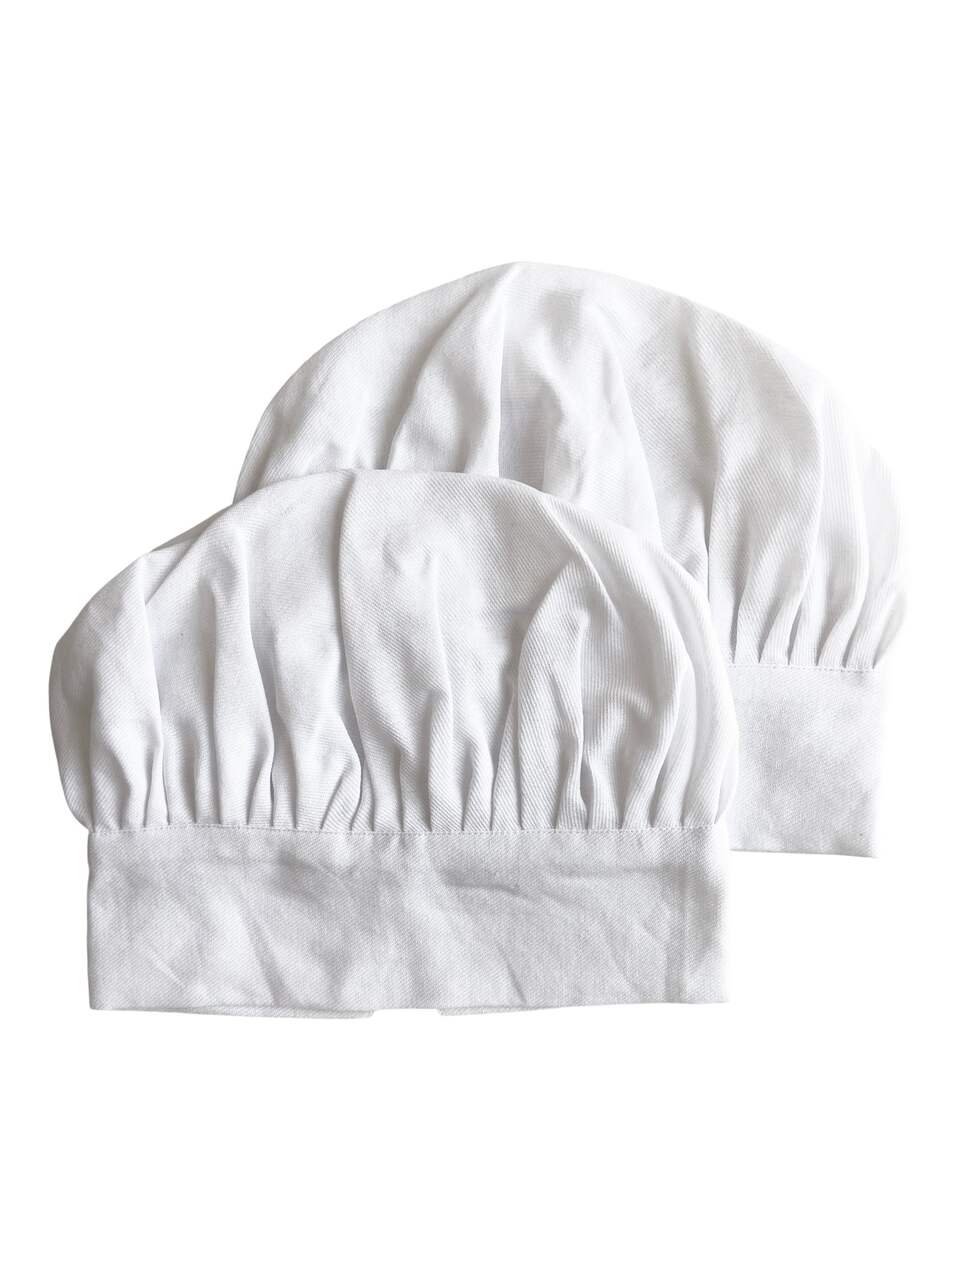 Youth White Chef Hats, 2-pk